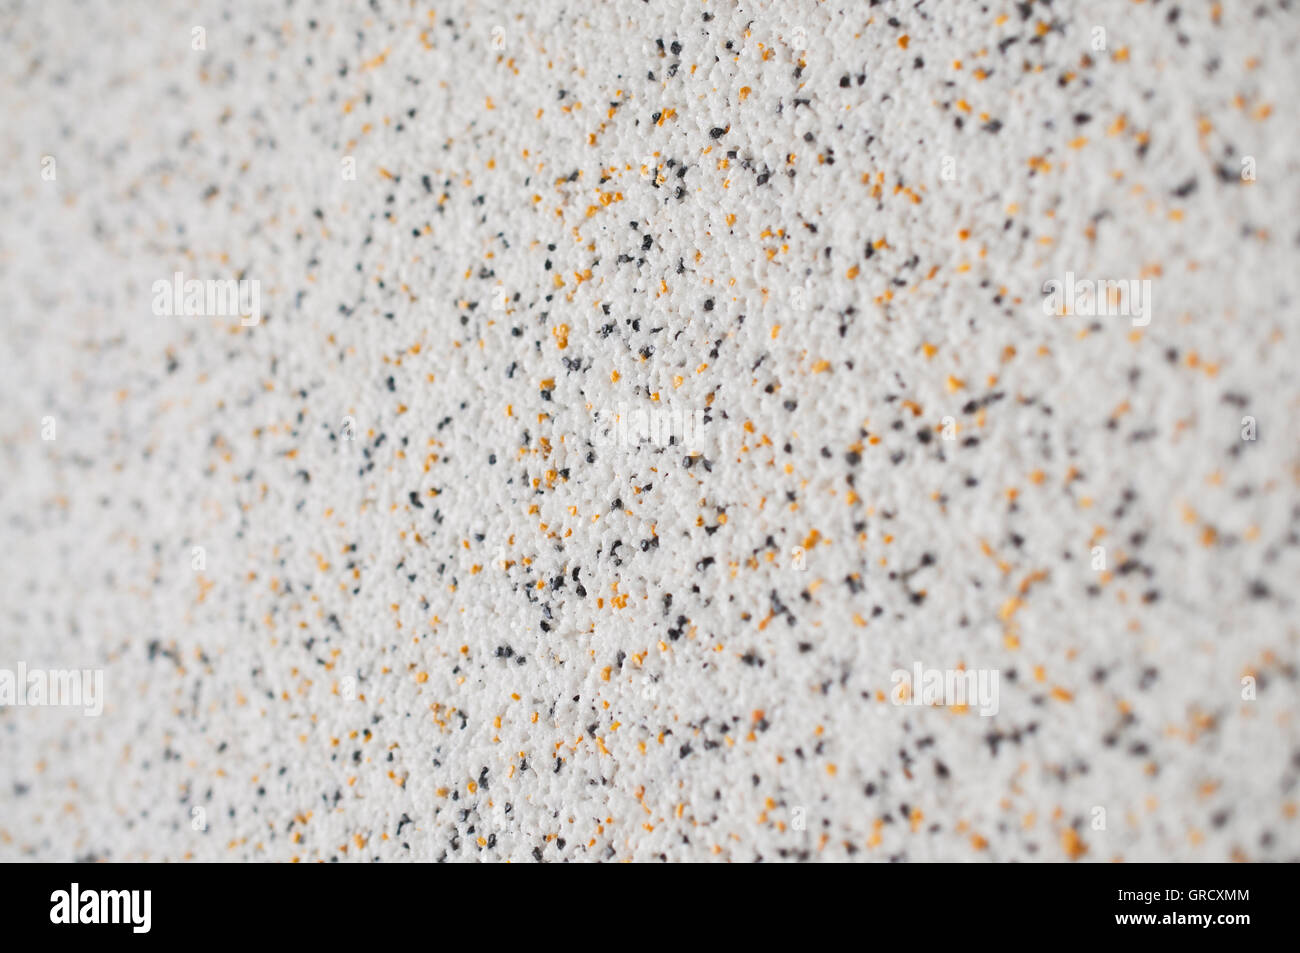 Stone Plaster In White, Brown And Black Stock Photo